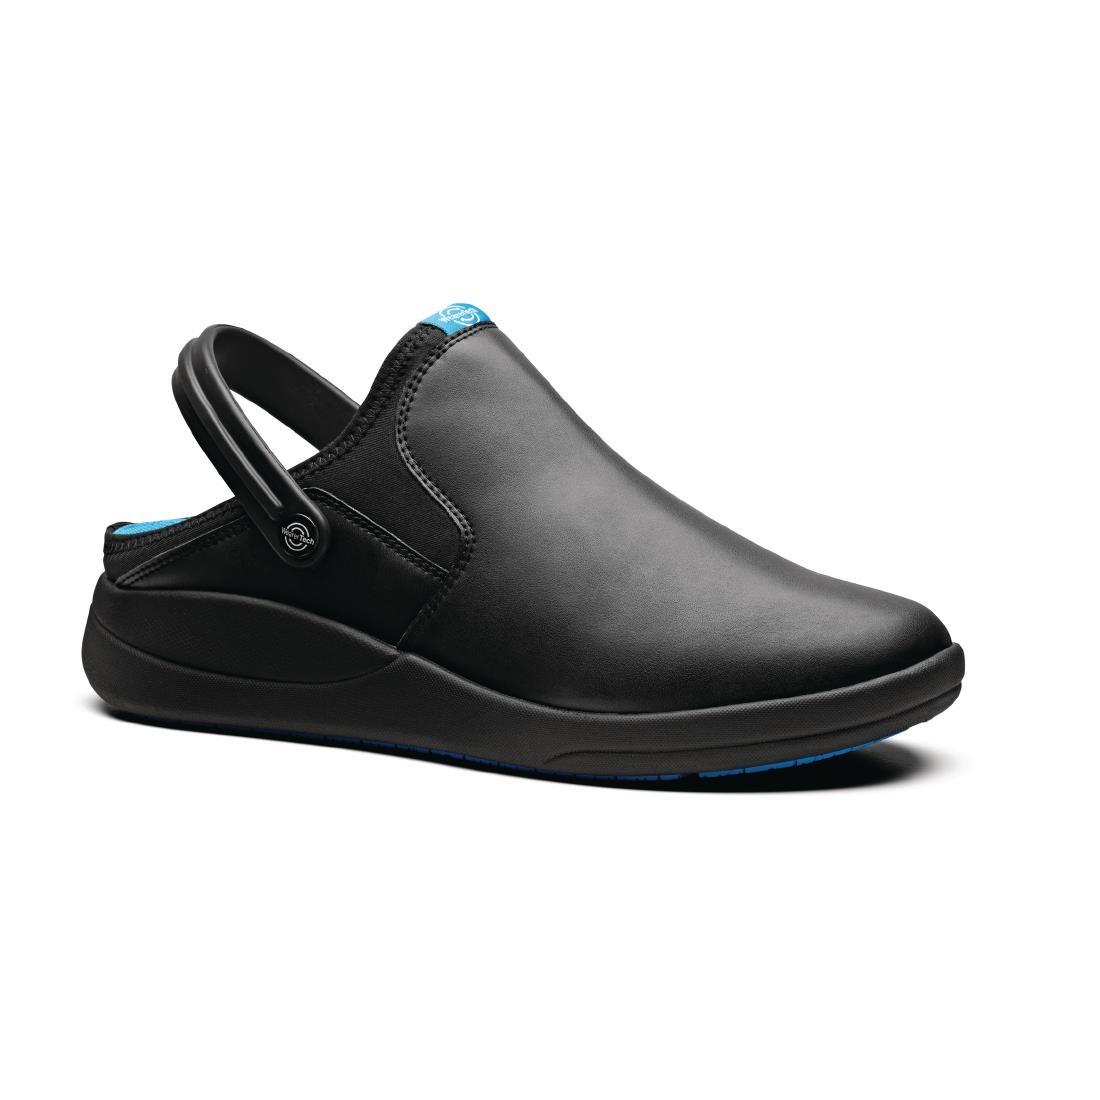 WearerTech Refresh Clog Black with Firm Insoles Size 36 - BB556-3  - 2